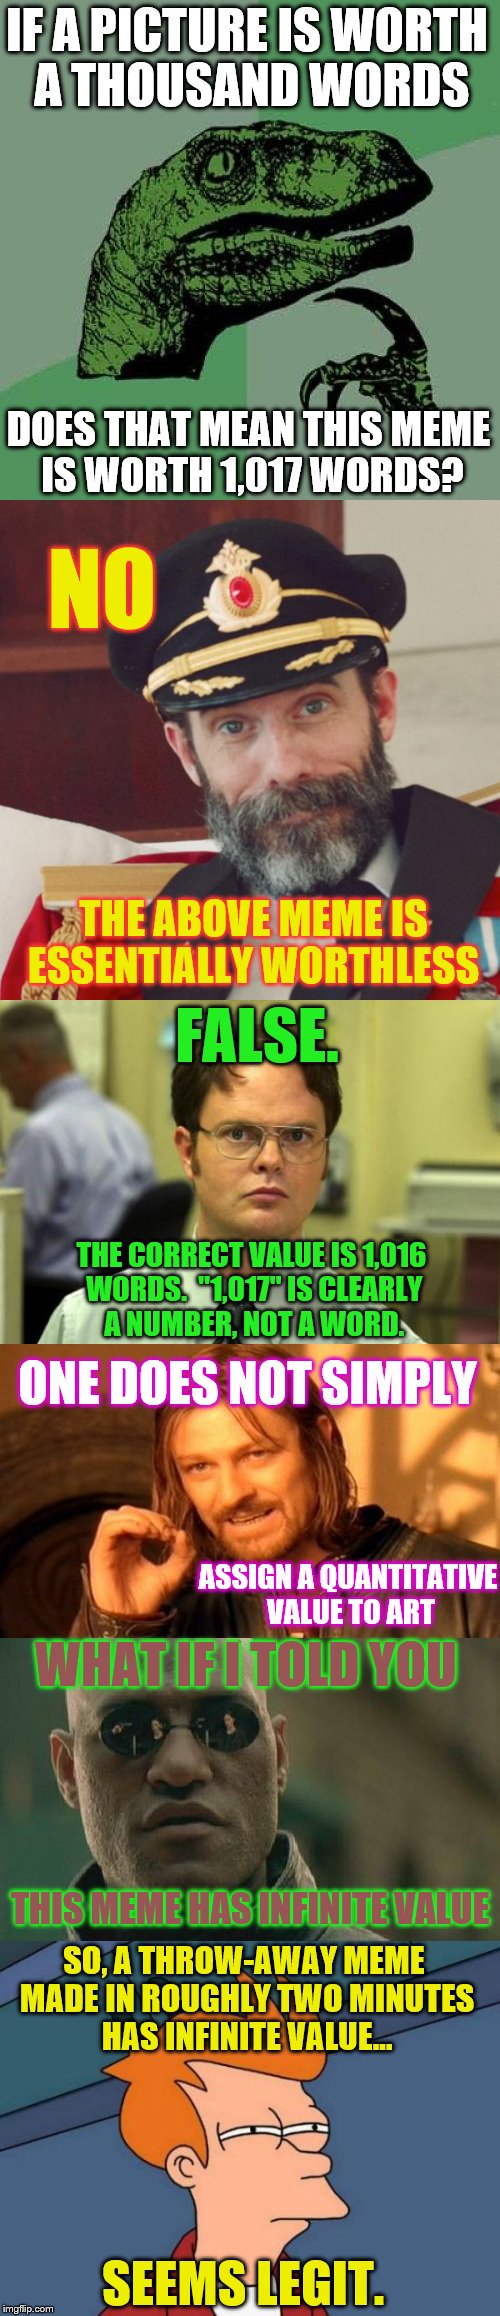 Heated Meme Roundtable Debate | IF A PICTURE IS WORTH A THOUSAND WORDS; DOES THAT MEAN THIS MEME IS WORTH 1,017 WORDS? NO; THE ABOVE MEME IS ESSENTIALLY WORTHLESS; FALSE. THE CORRECT VALUE IS 1,016 WORDS.  "1,017" IS CLEARLY A NUMBER, NOT A WORD. ONE DOES NOT SIMPLY; ASSIGN A QUANTITATIVE VALUE TO ART; WHAT IF I TOLD YOU; THIS MEME HAS INFINITE VALUE; SO, A THROW-AWAY MEME MADE IN ROUGHLY TWO MINUTES HAS INFINITE VALUE... SEEMS LEGIT. | image tagged in memes,phunny,funny,meme template,philosoraptor | made w/ Imgflip meme maker